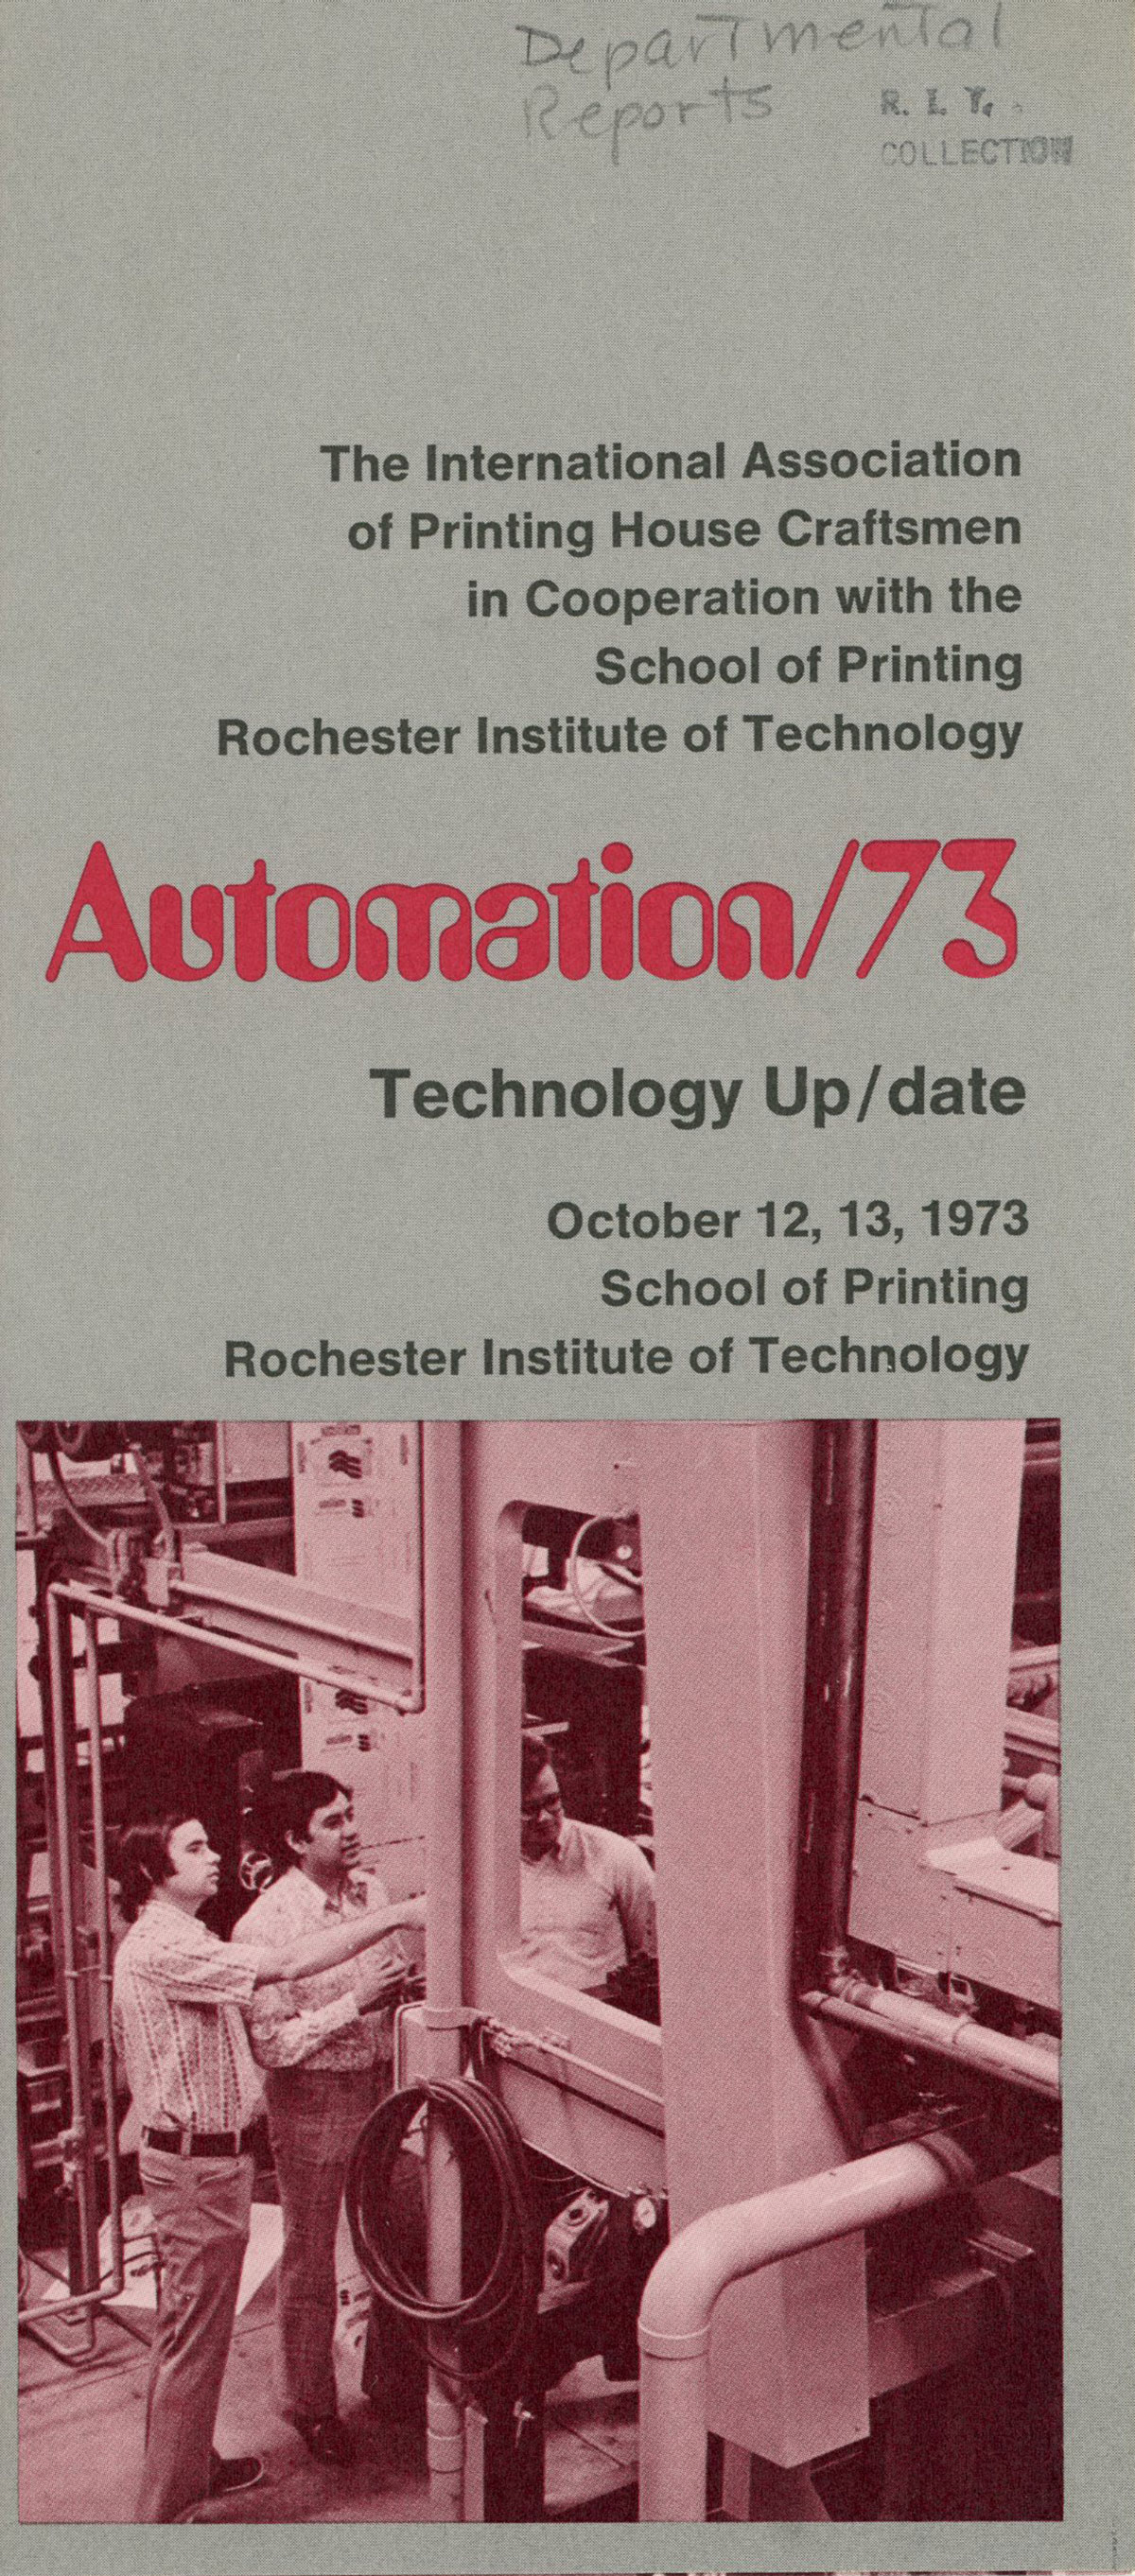 The International Association of Printing House Craftsmen in Cooperation with the School of Printing Rochester Institute of Technology Automation/73 Technology Up/date October 12, 13, 1973 School of Printing Rochester Institute of Technology